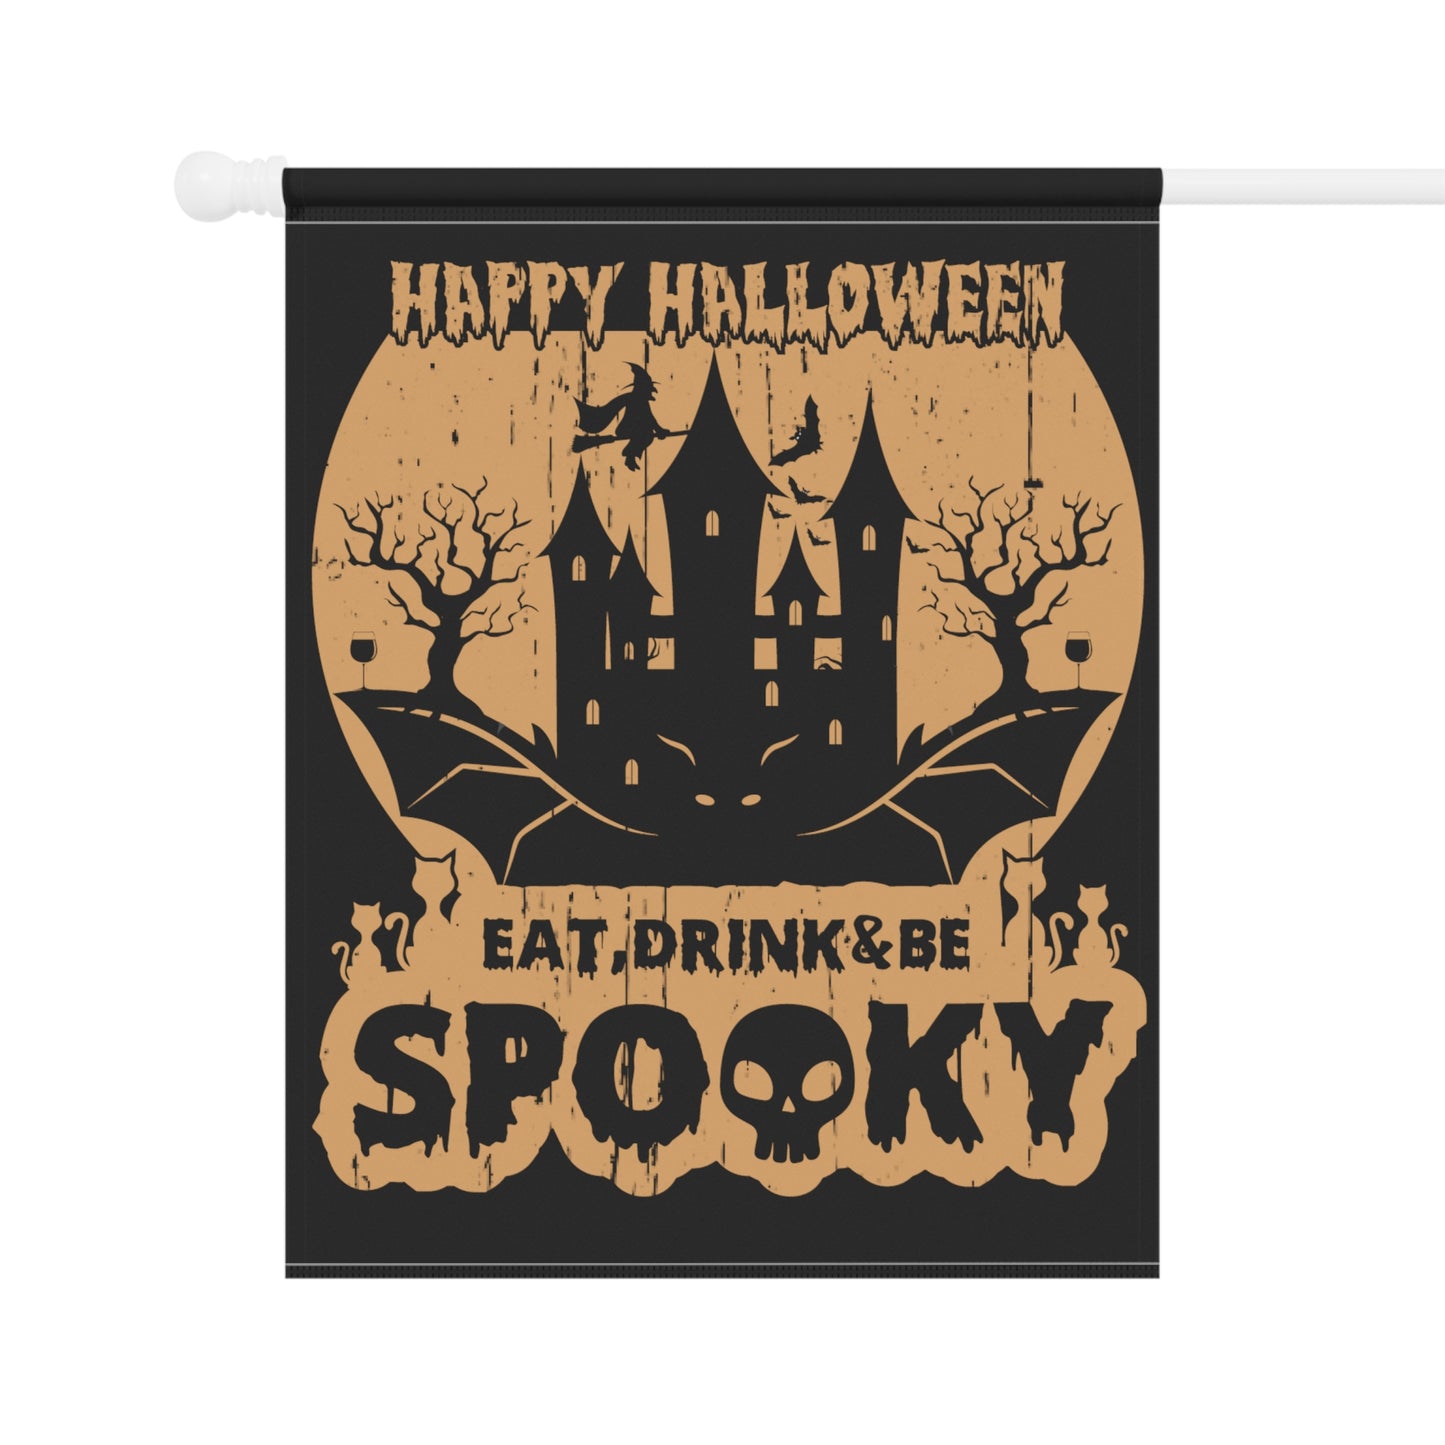 Eat Drink and be Spooky Halloween Garden & House Banner